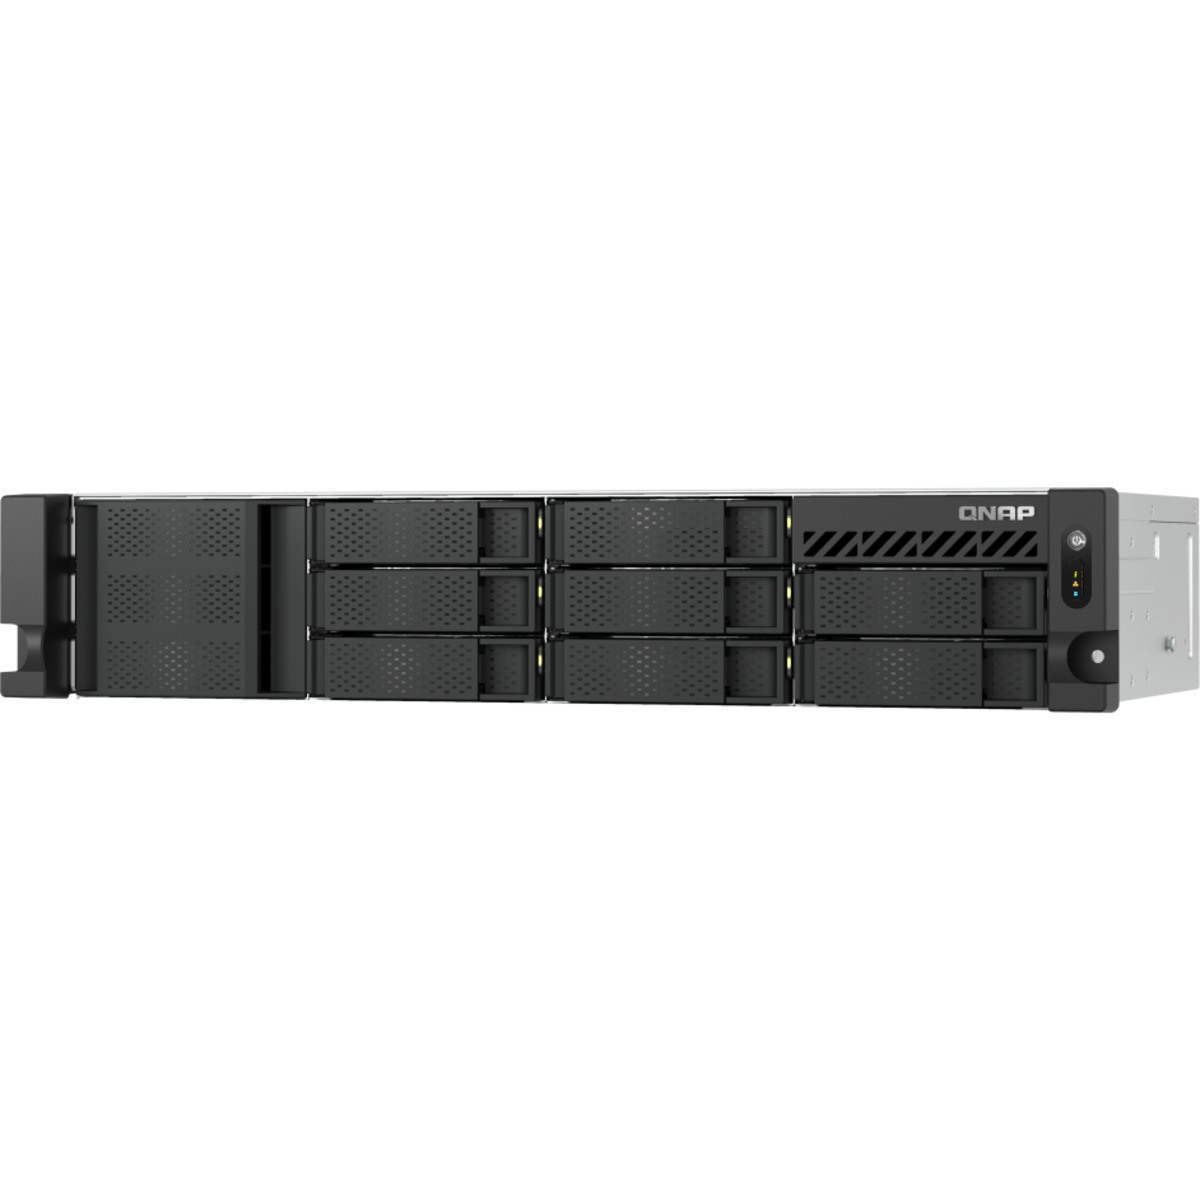 QNAP TS-855eU-RP 60tb 8-Bay RackMount Multimedia / Power User / Business NAS - Network Attached Storage Device 5x12tb Seagate EXOS X18 ST12000NM000J 3.5 7200rpm SATA 6Gb/s HDD ENTERPRISE Class Drives Installed - Burn-In Tested - FREE RAM UPGRADE TS-855eU-RP